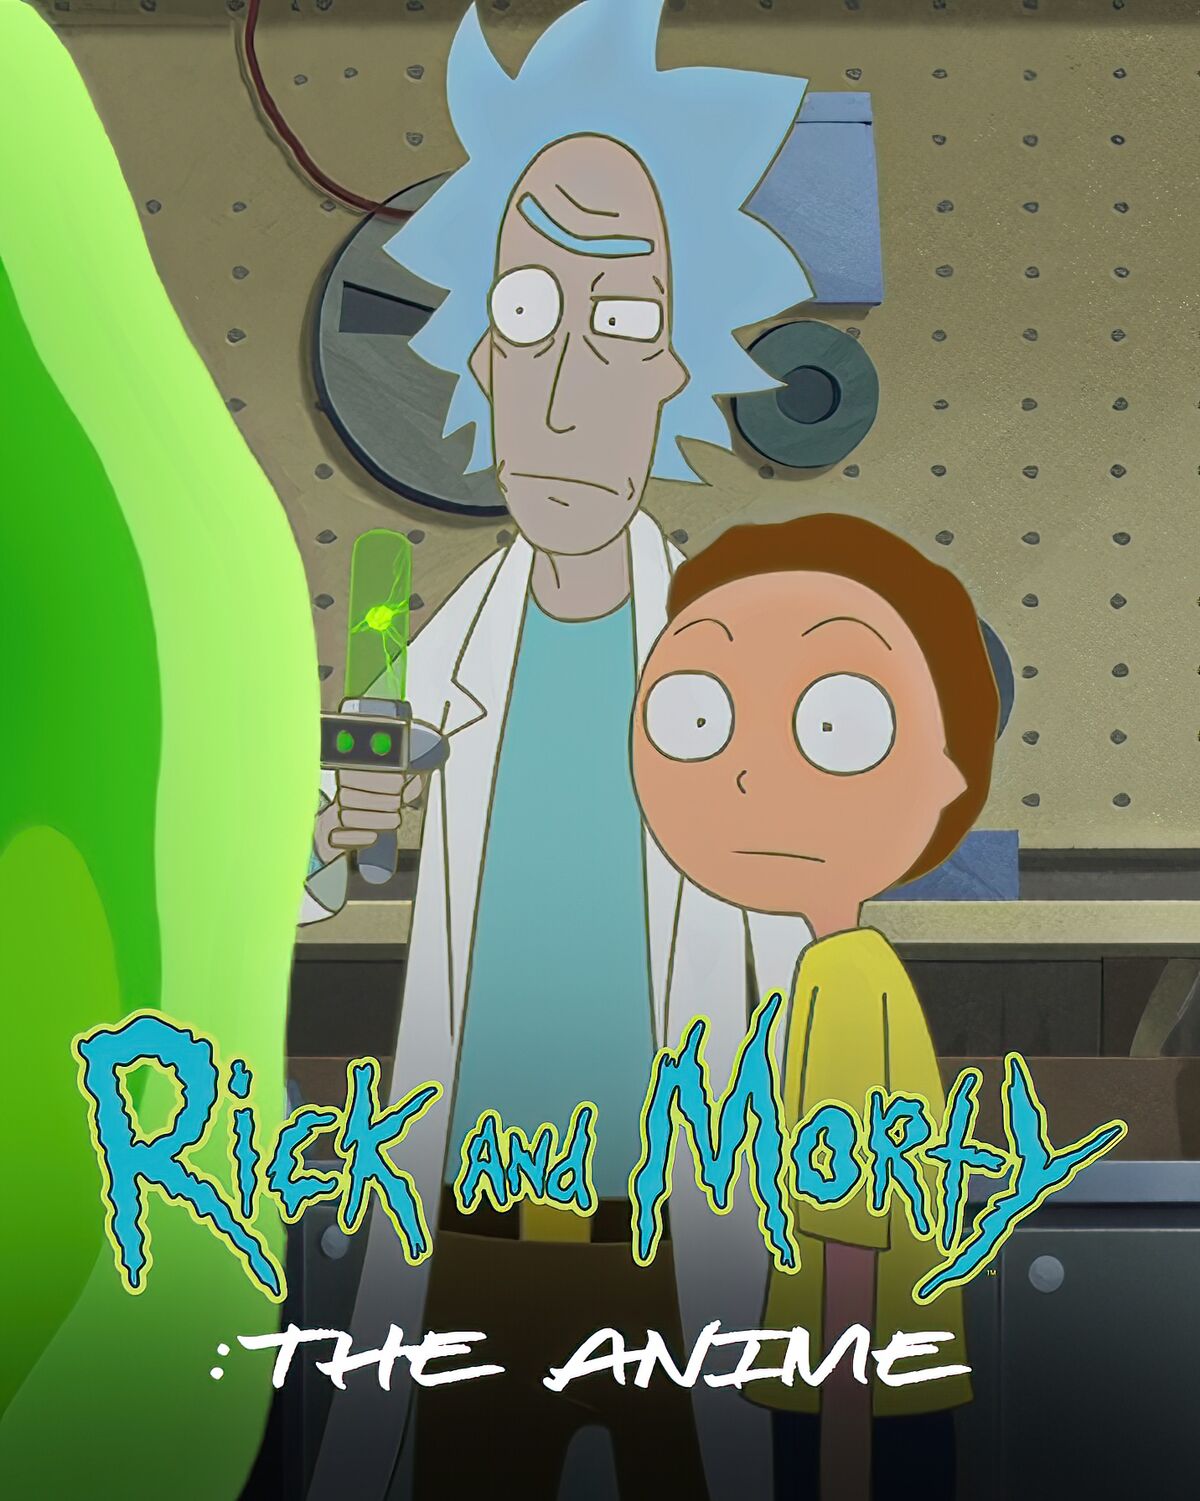 Rick and Morty Once Again Reveals That Science Fiction Has Consequences   Den of Geek